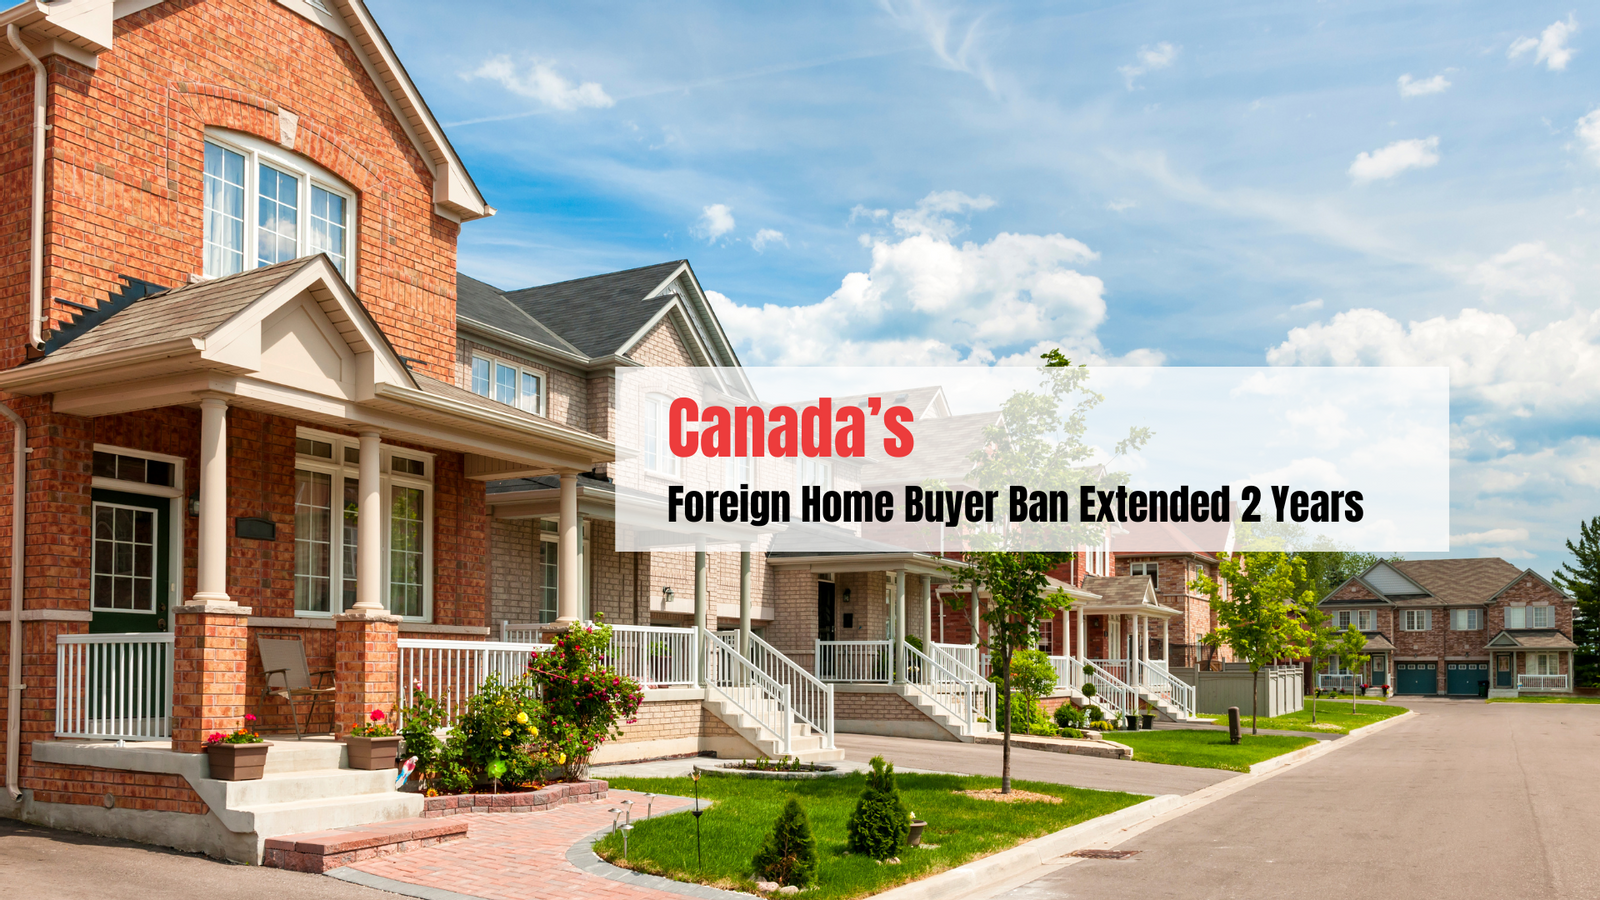 NEWS ALERT: Foreign Buyer Ban Extended 2 Years